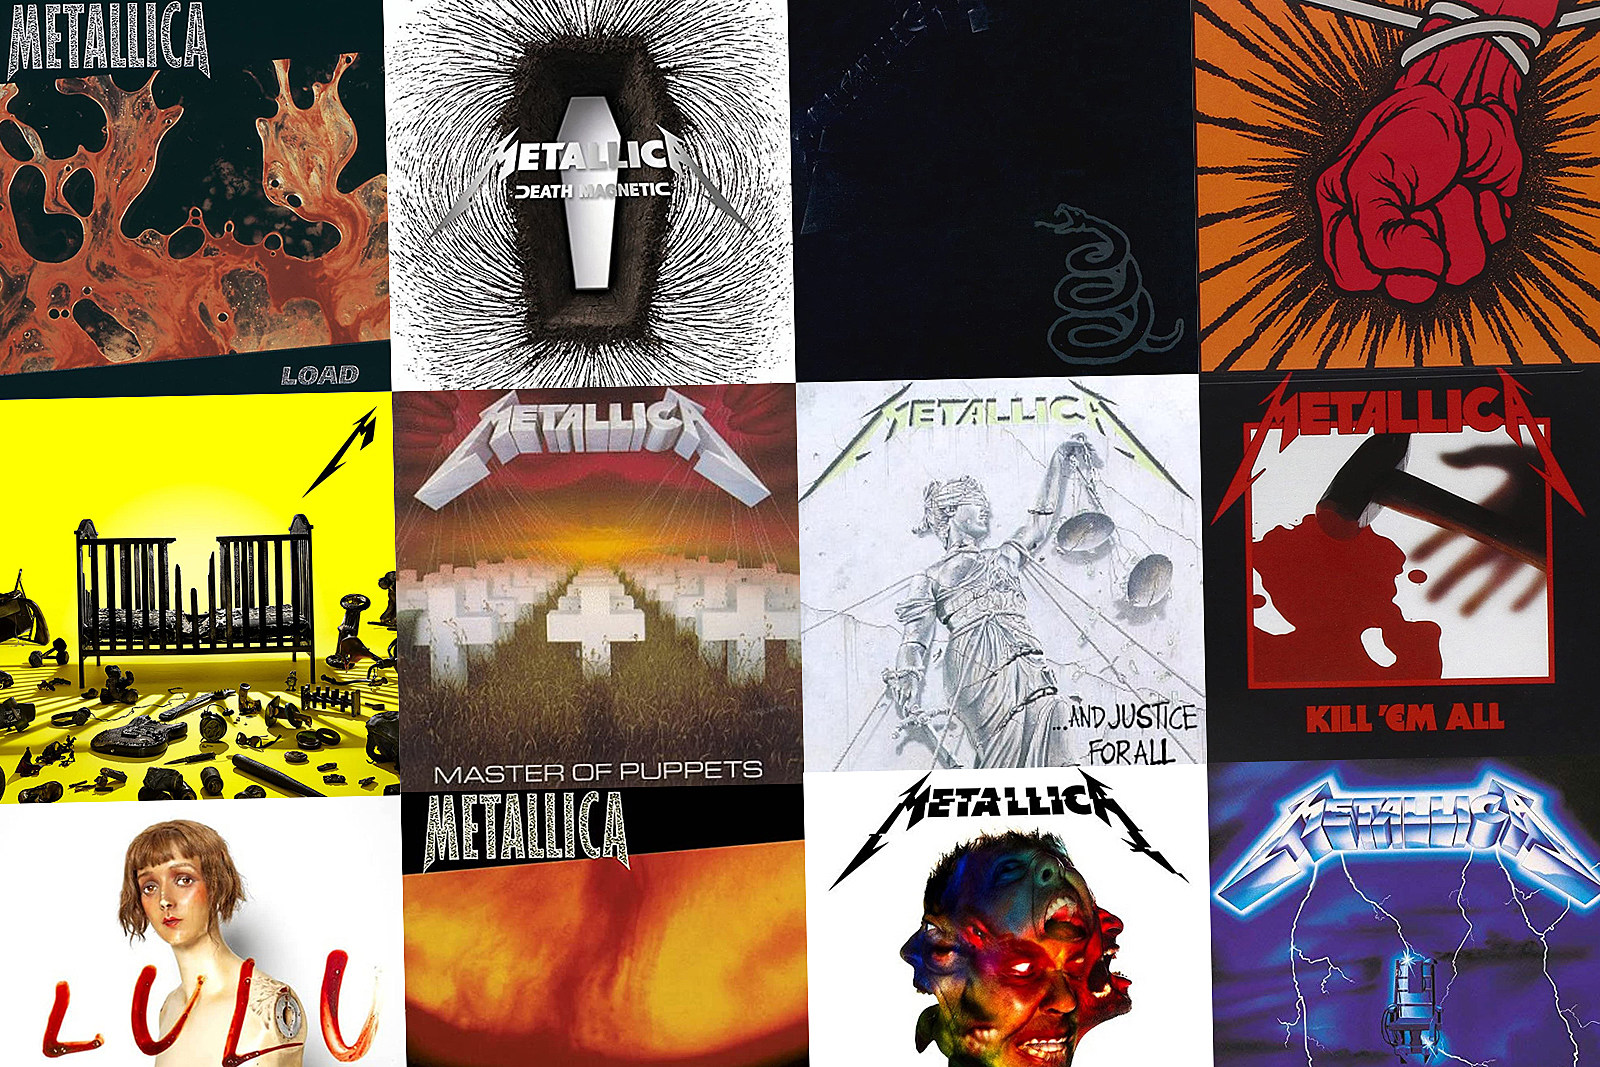 Metallica Discography: Death Magnetic